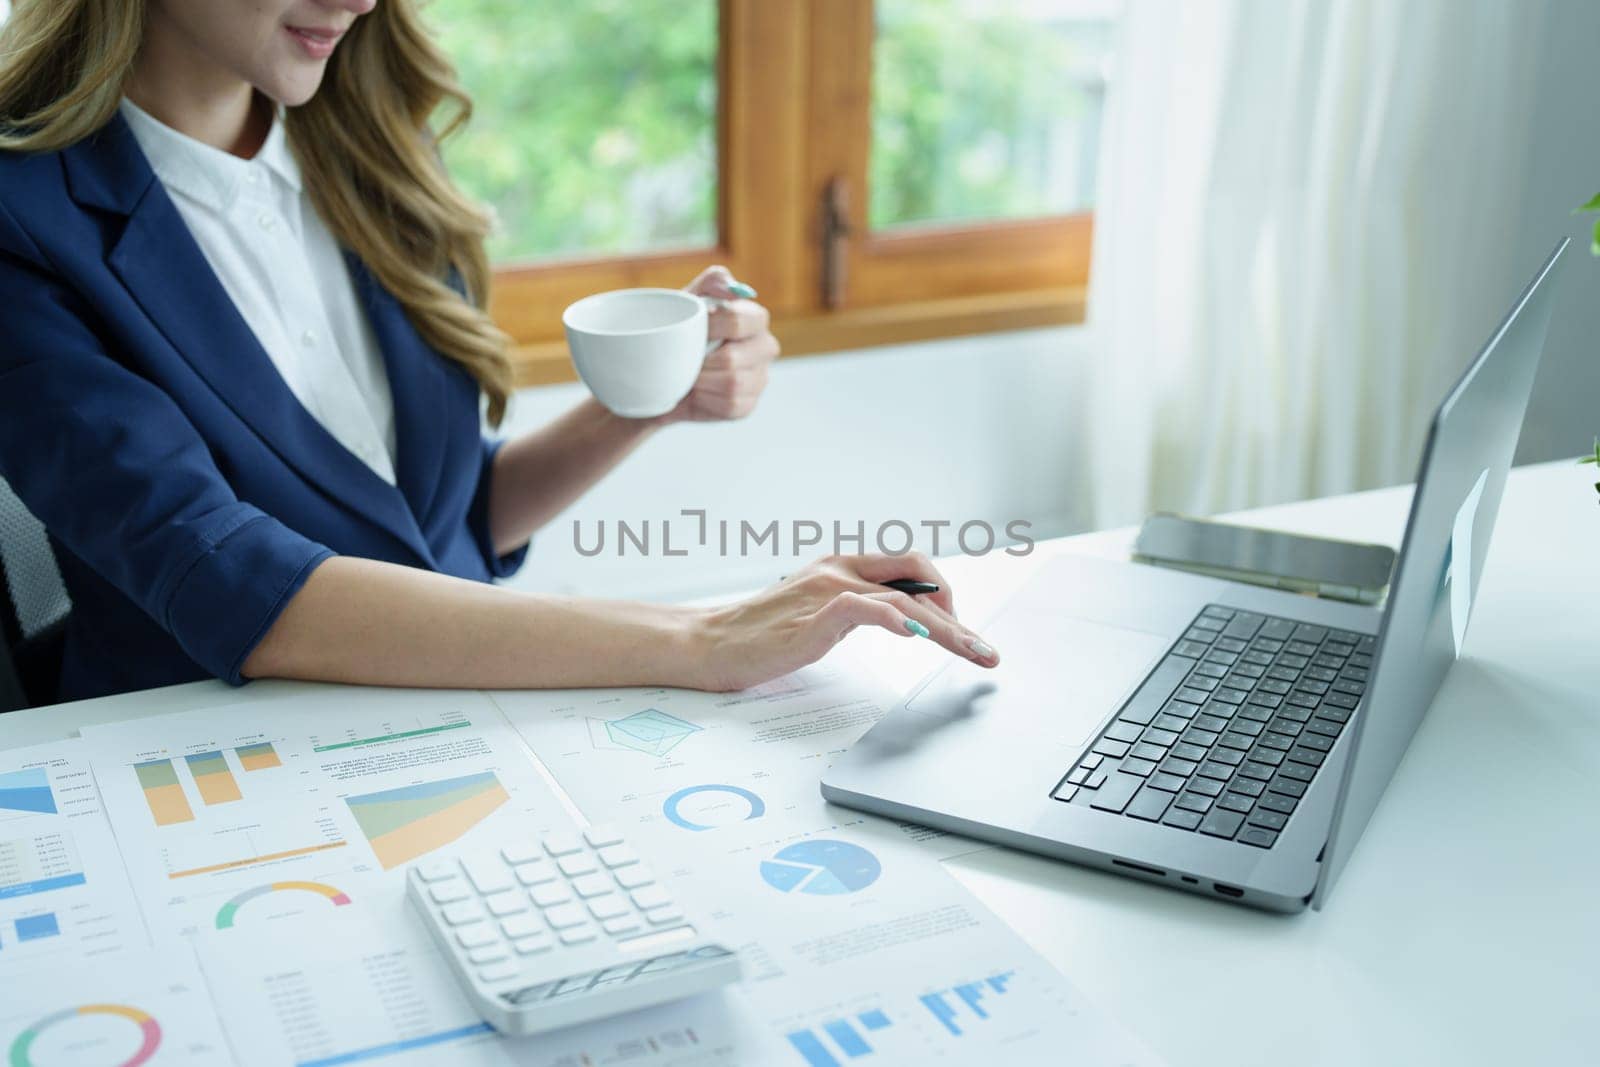 Portrait of an Asian business woman drinking coffee while working with a computer and financial statements documents on her desk by Manastrong